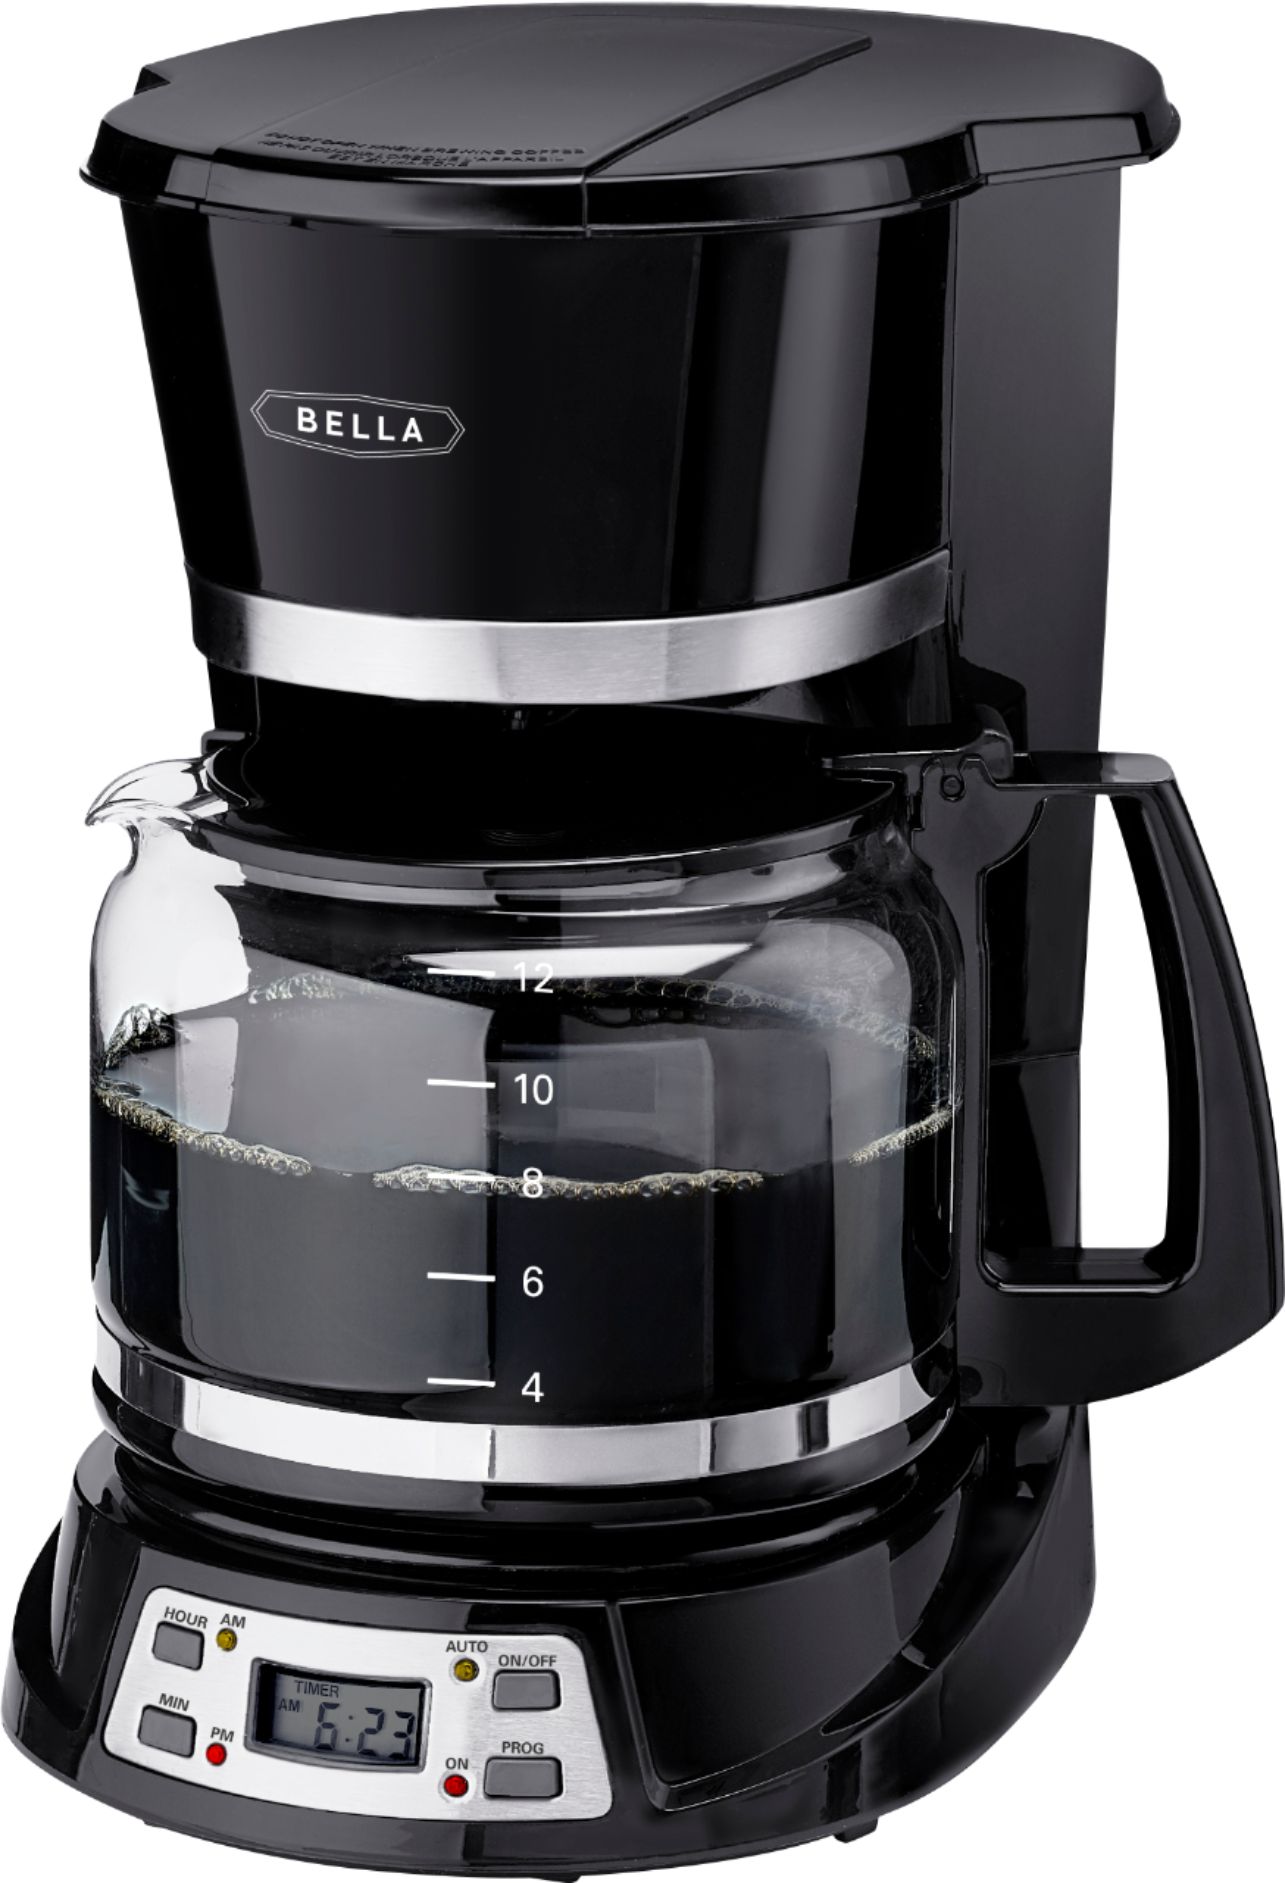 Bella 12-Cup Programmable Coffee Maker, $11.99 + Free Shipping